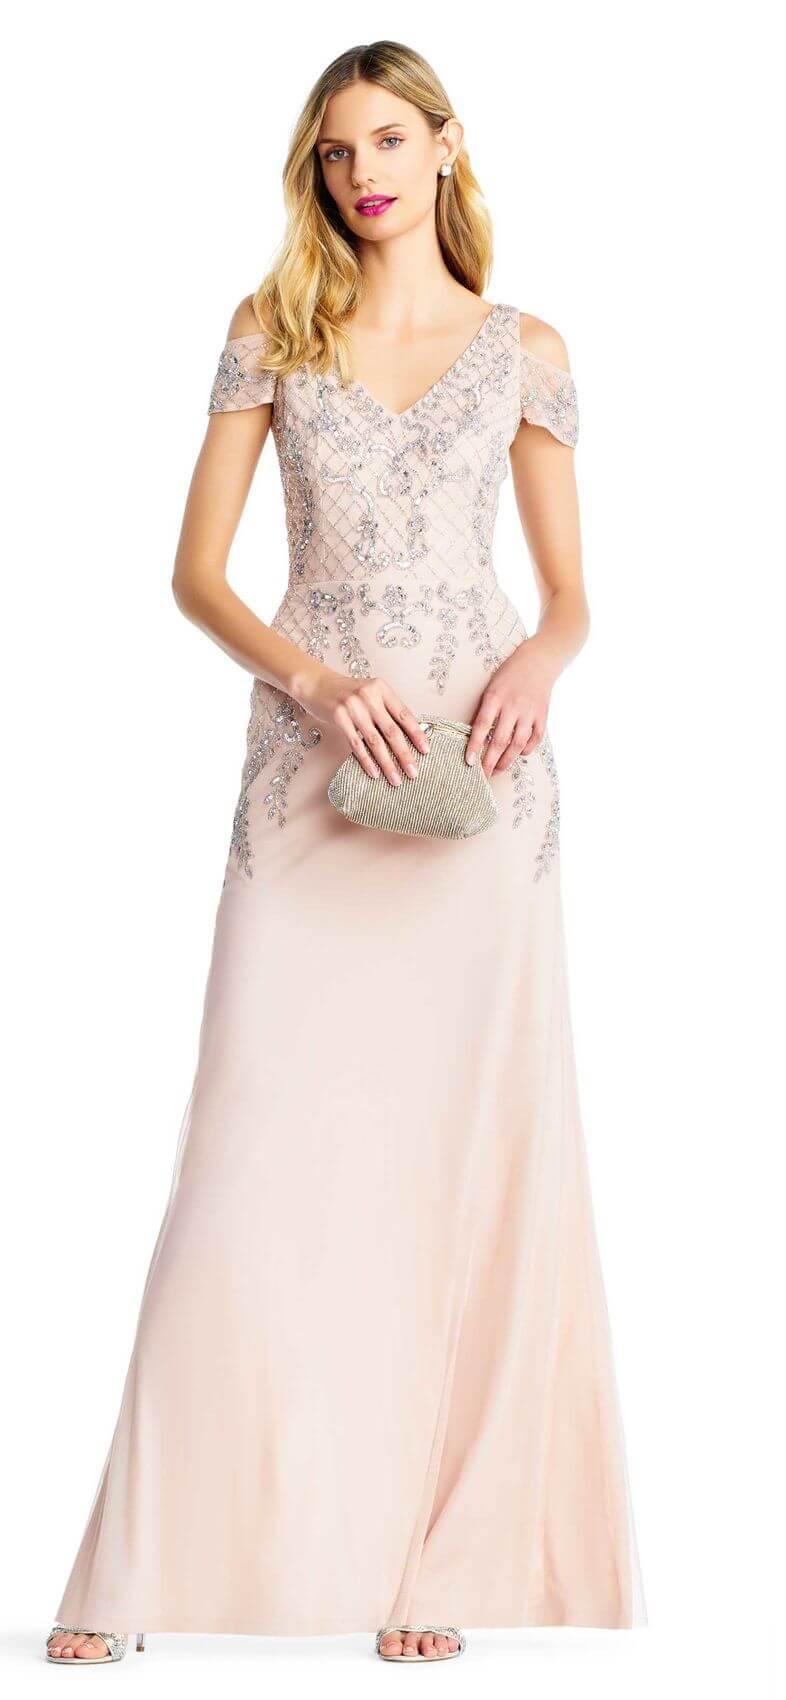 Adrianna Papell Long Formal Petite Evening Prom Dress - The Dress Outlet Adrianna Papell